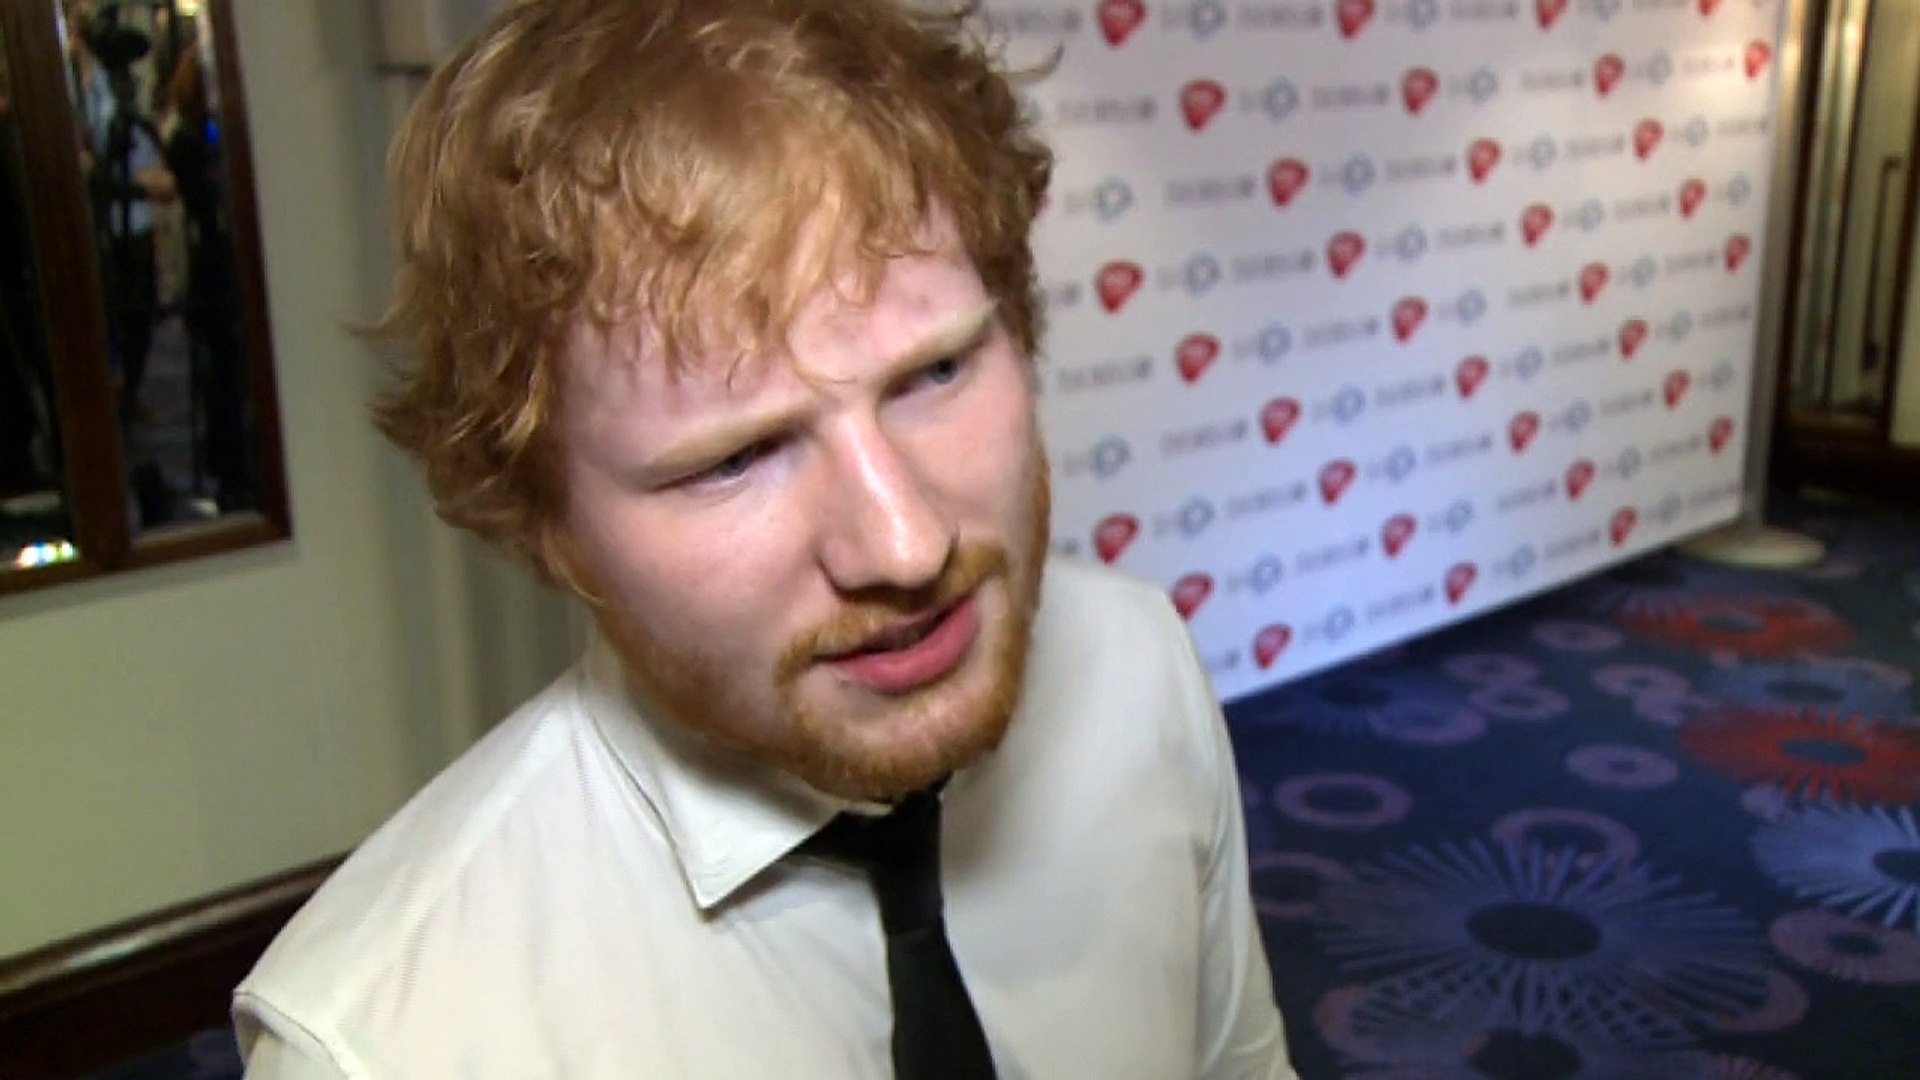 Find out who gave Ed Sheeran 200 quid at the Ivors